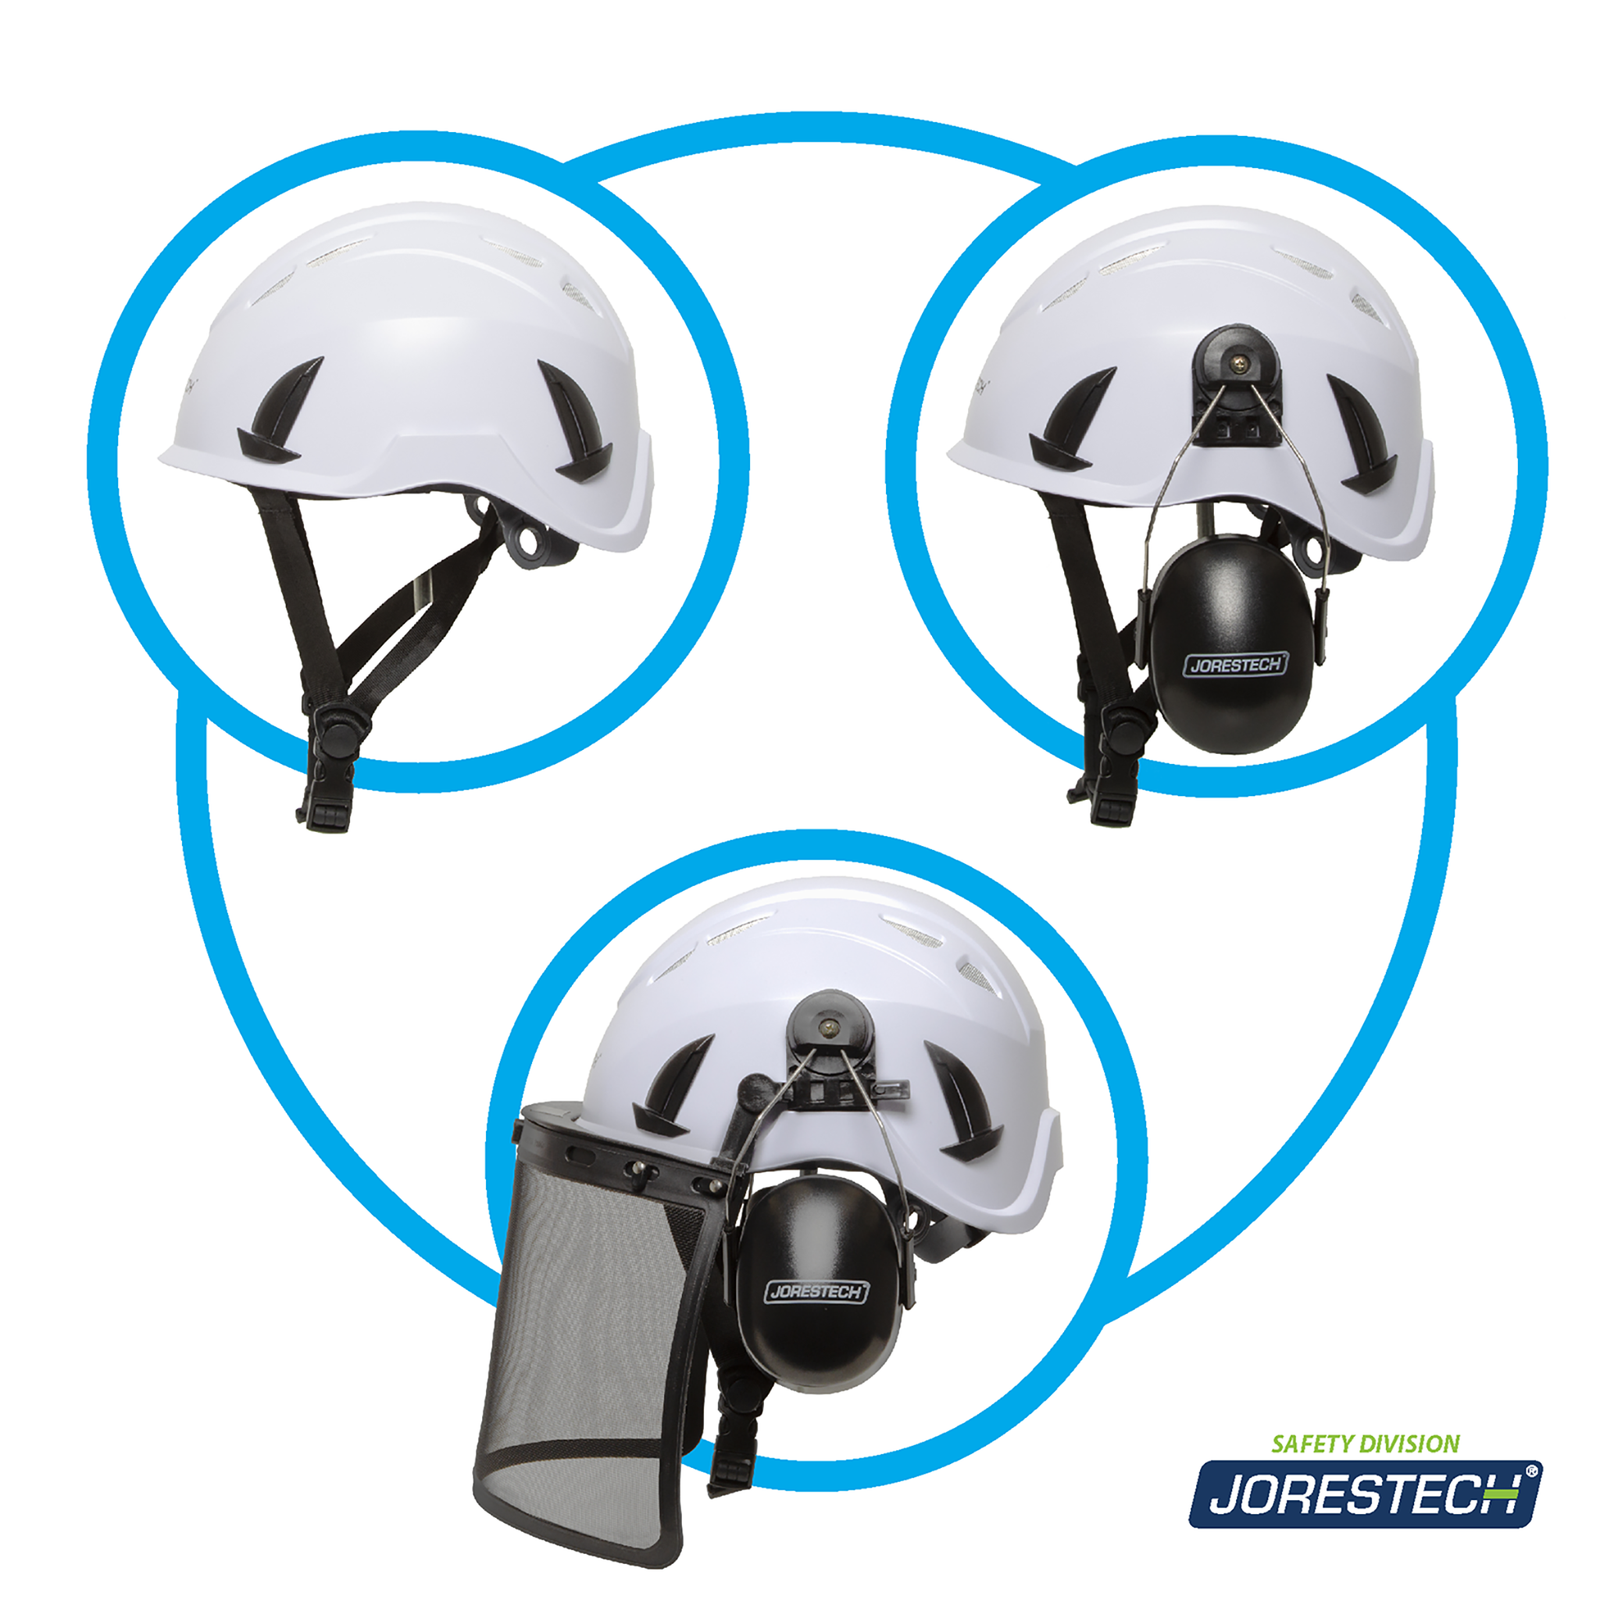 Feature 3 different ways to use this safety system: only the hard hat, the hard hat with the ear muffs, and the hard hat plus ear muffs and face shield.